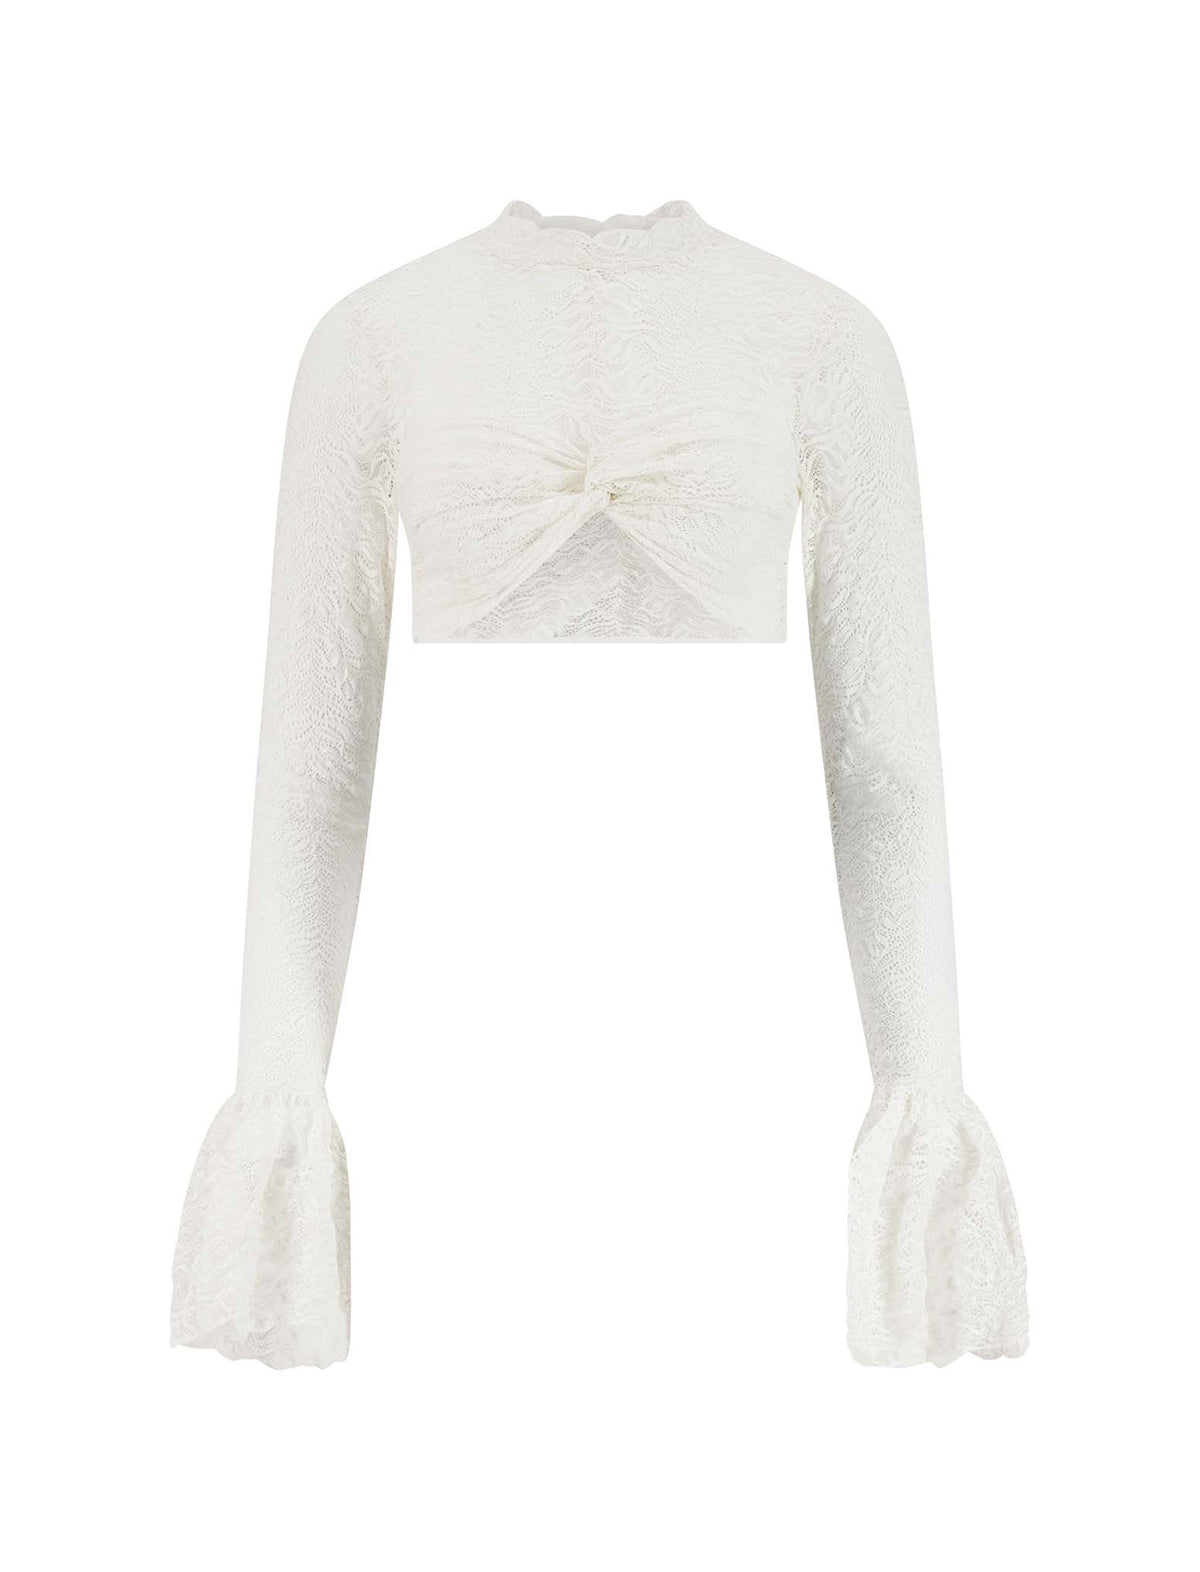 BEAUFILLE Frida Lace Blouse in White